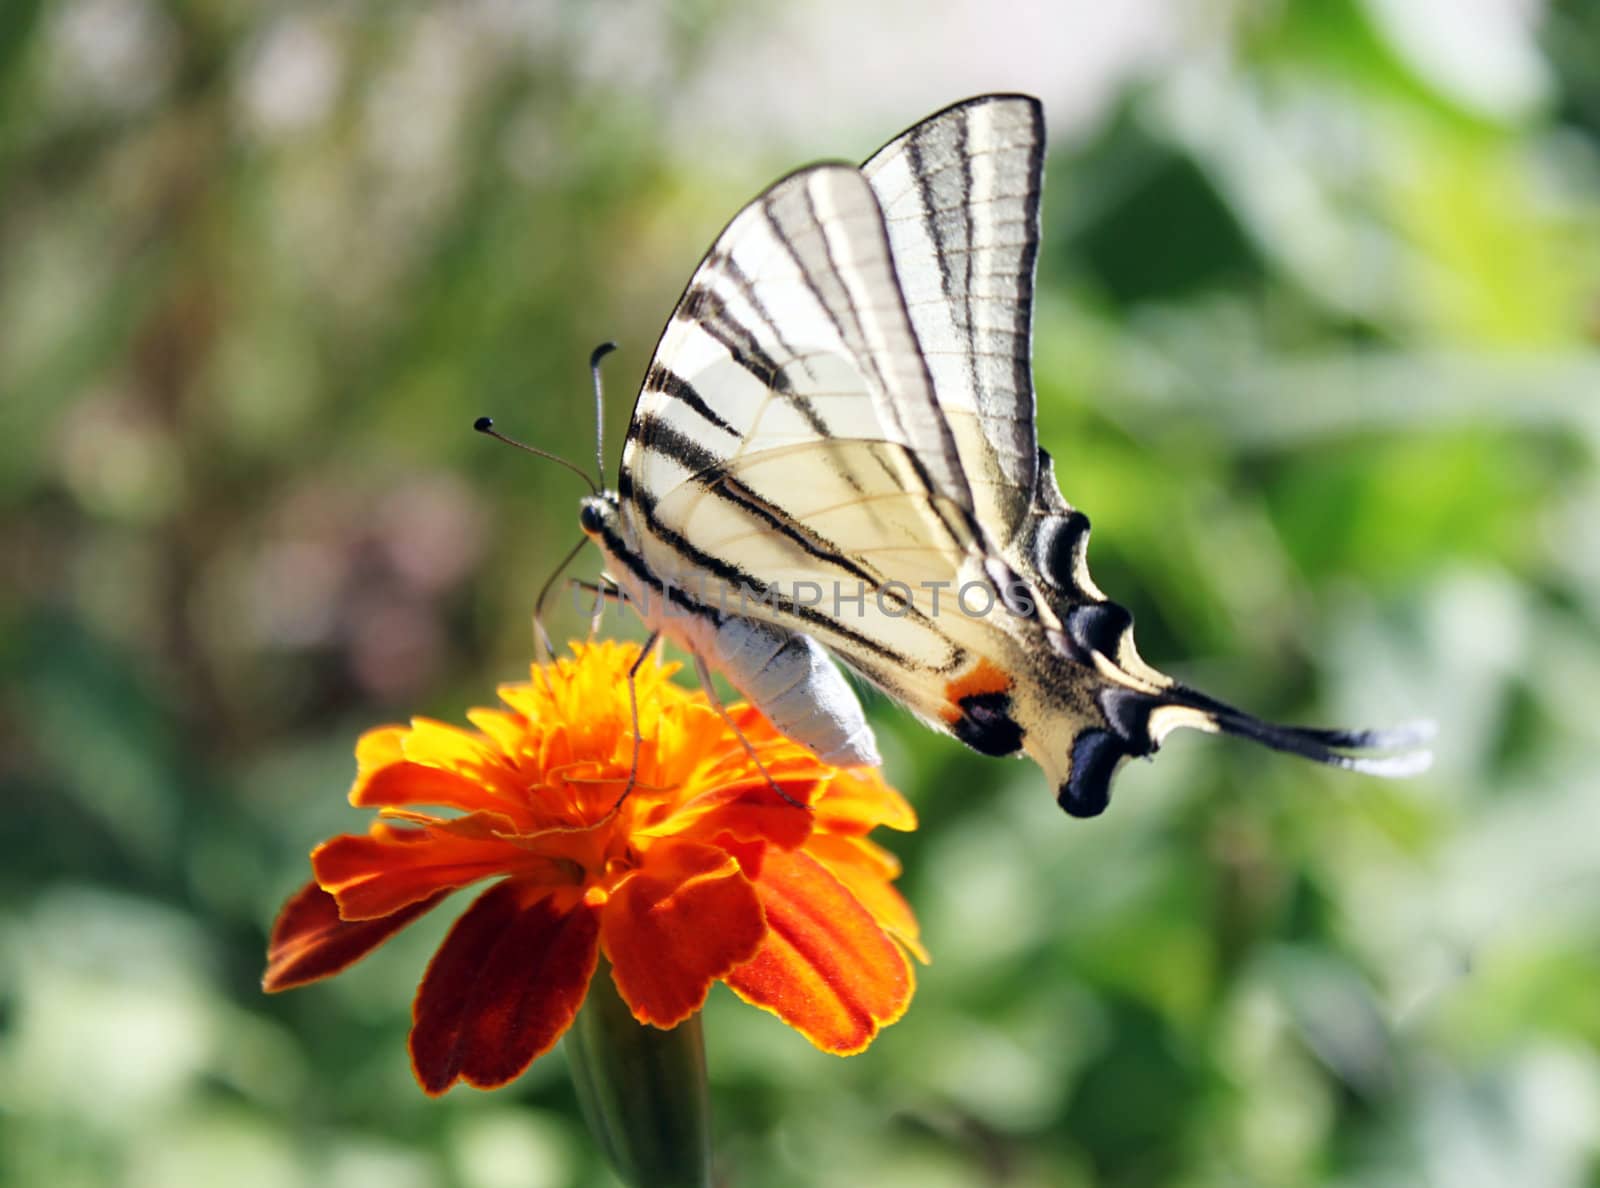 butterfly (Scarce Swallowtail) with opened wings on  flower (marigold)